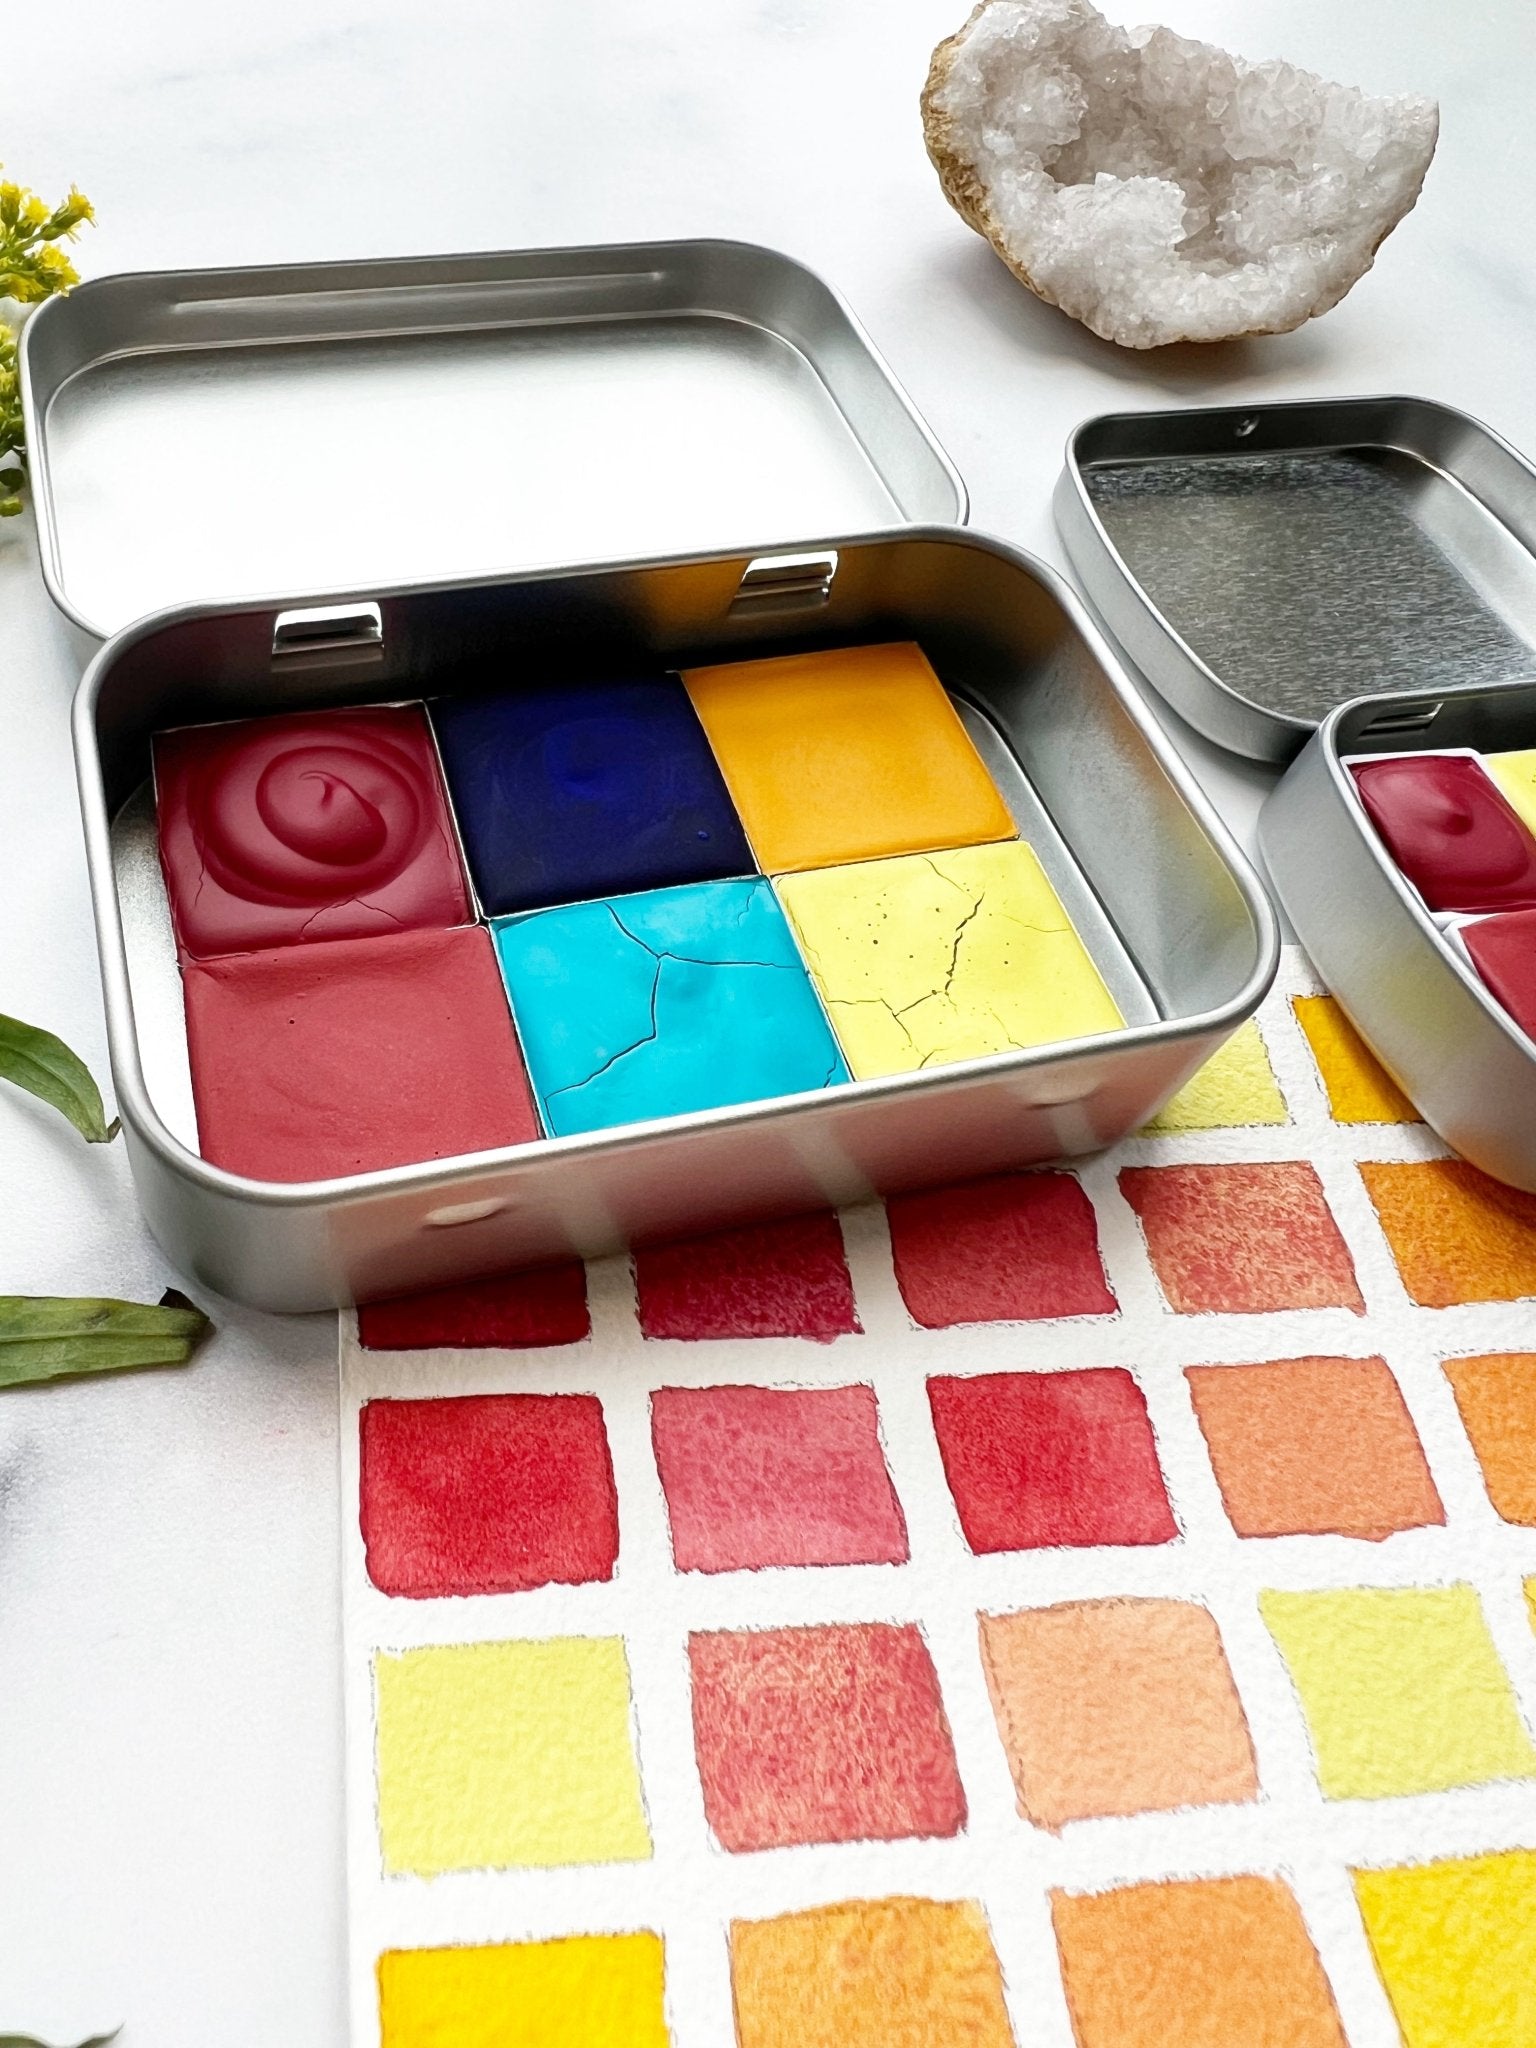 The Everywhere Mixing Palette, 6 colors of handmade paint in a travel tin - Ruby Mountain